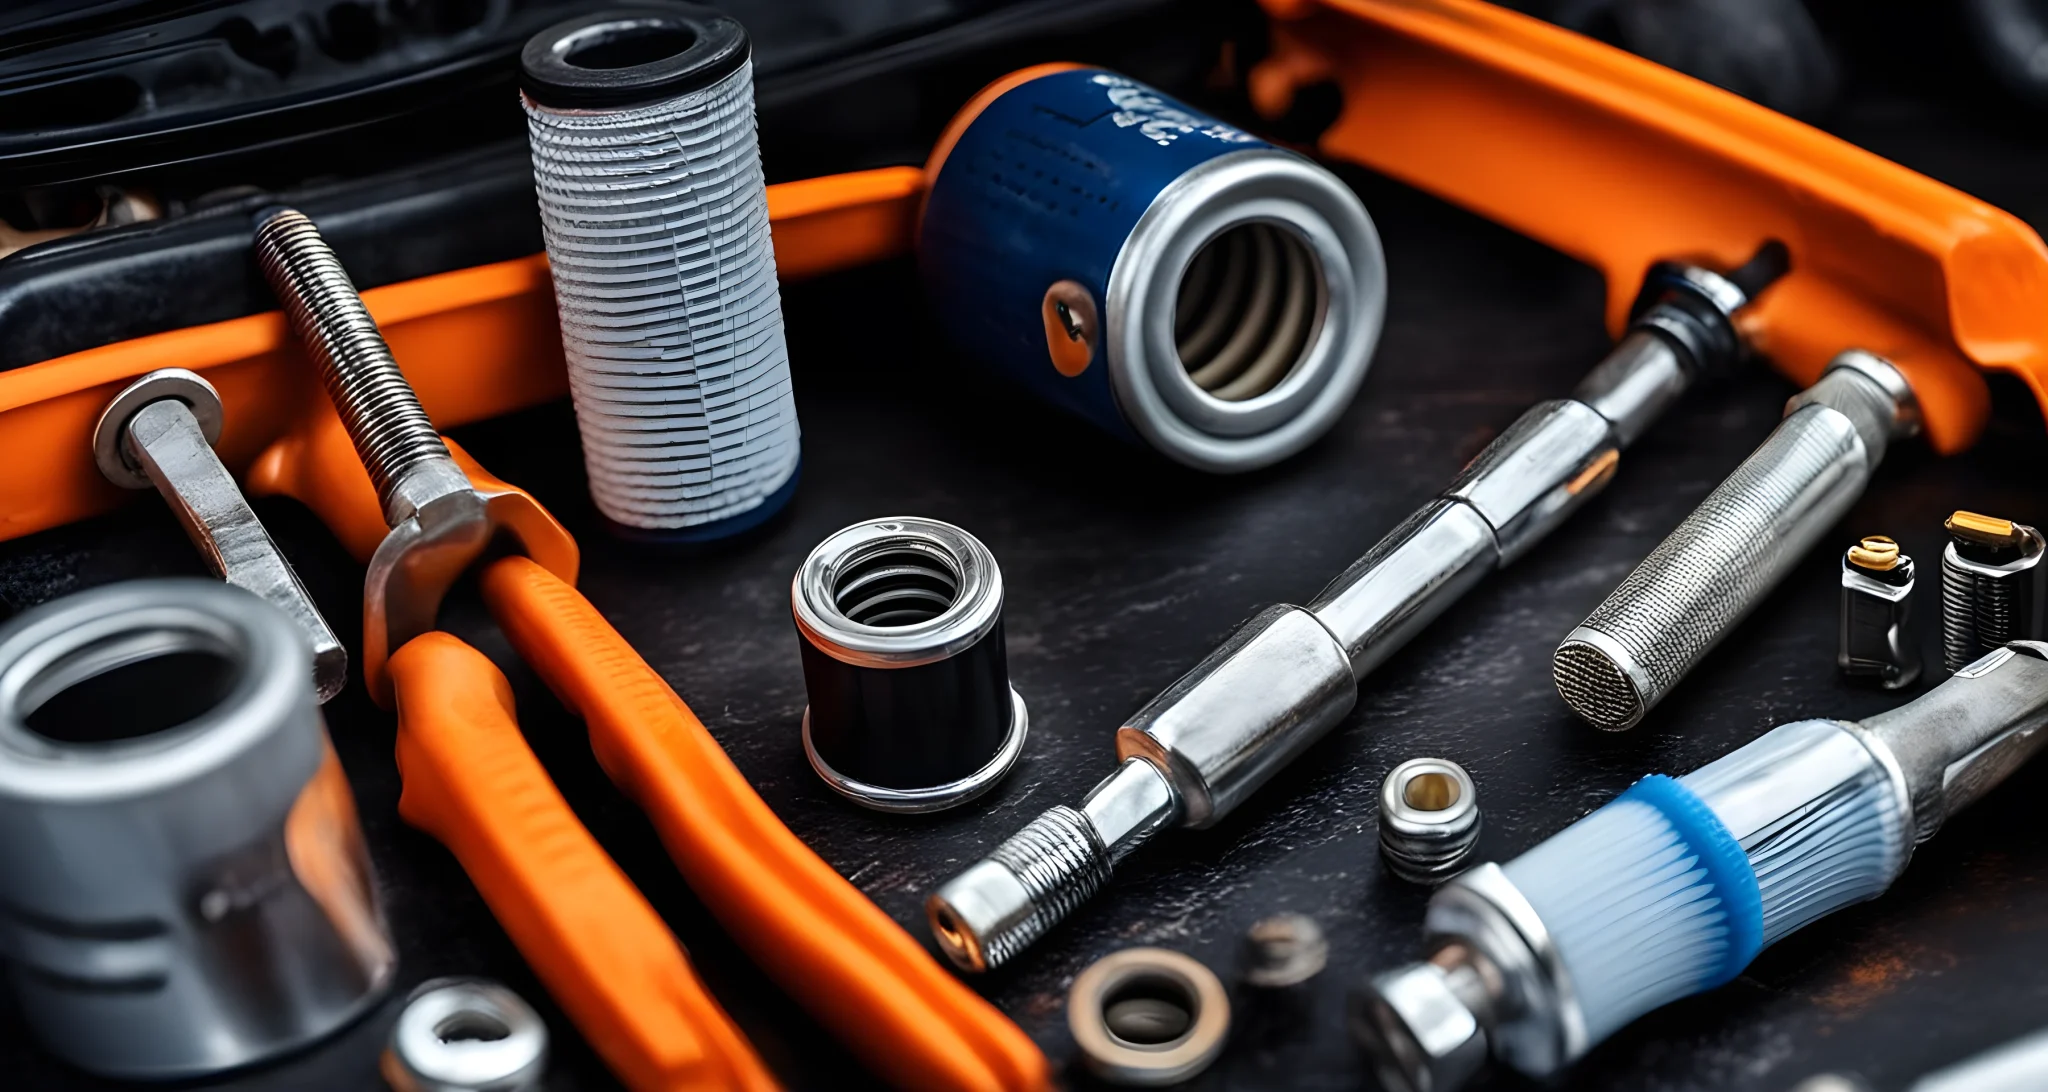 The image shows a set of car maintenance tools, including oil filters, wrenches, and spark plugs.